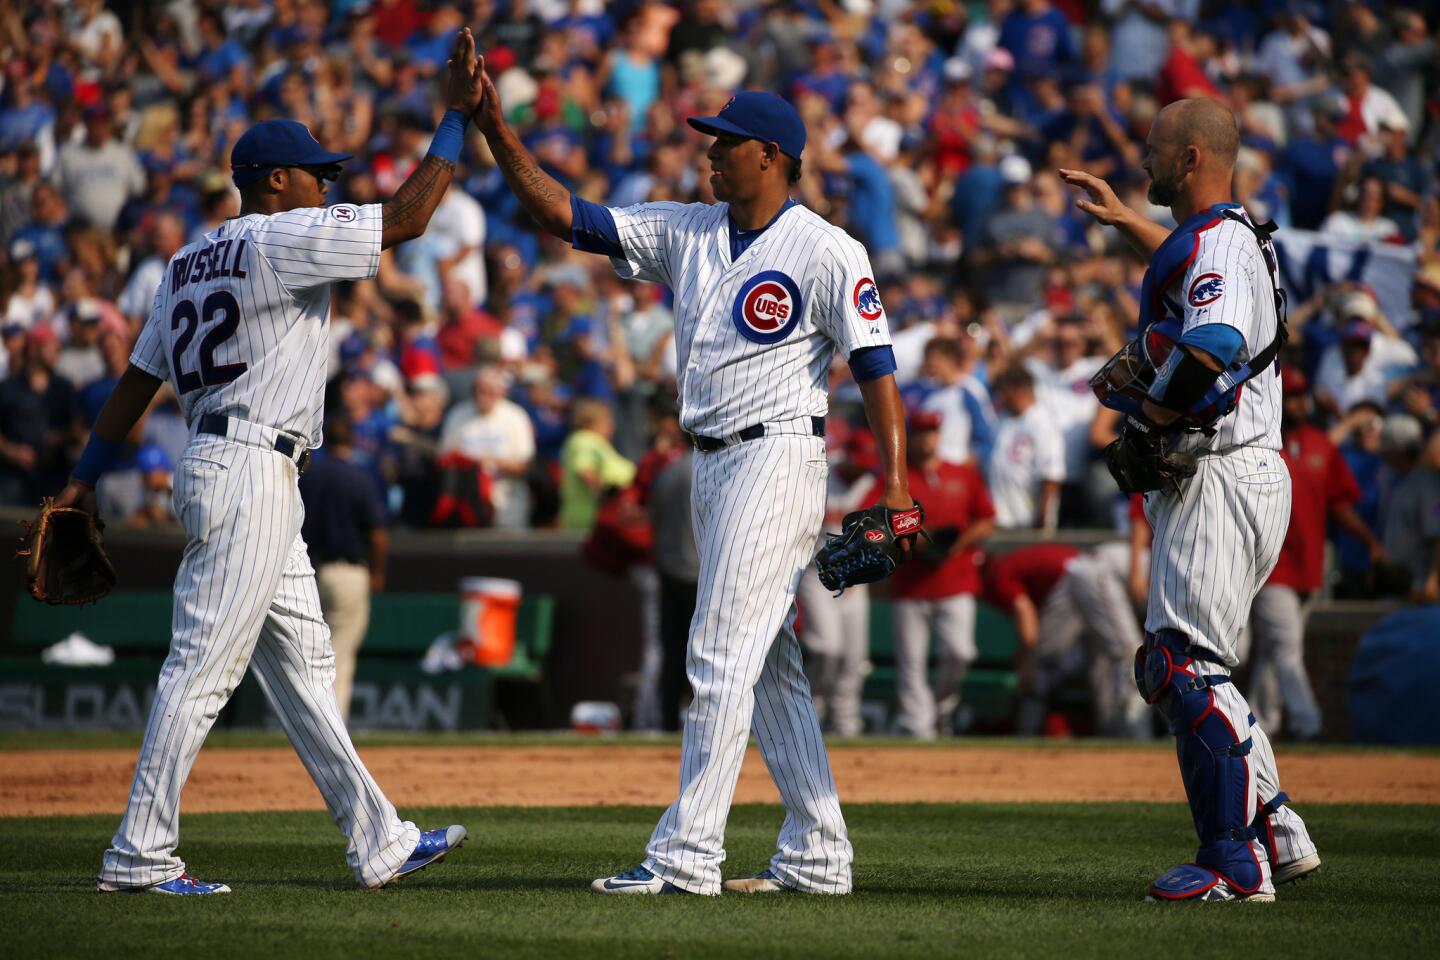 Cubs relief pitcher Hector Rondon, center, is congratulated by second baseman Addison Russell after making the final out.